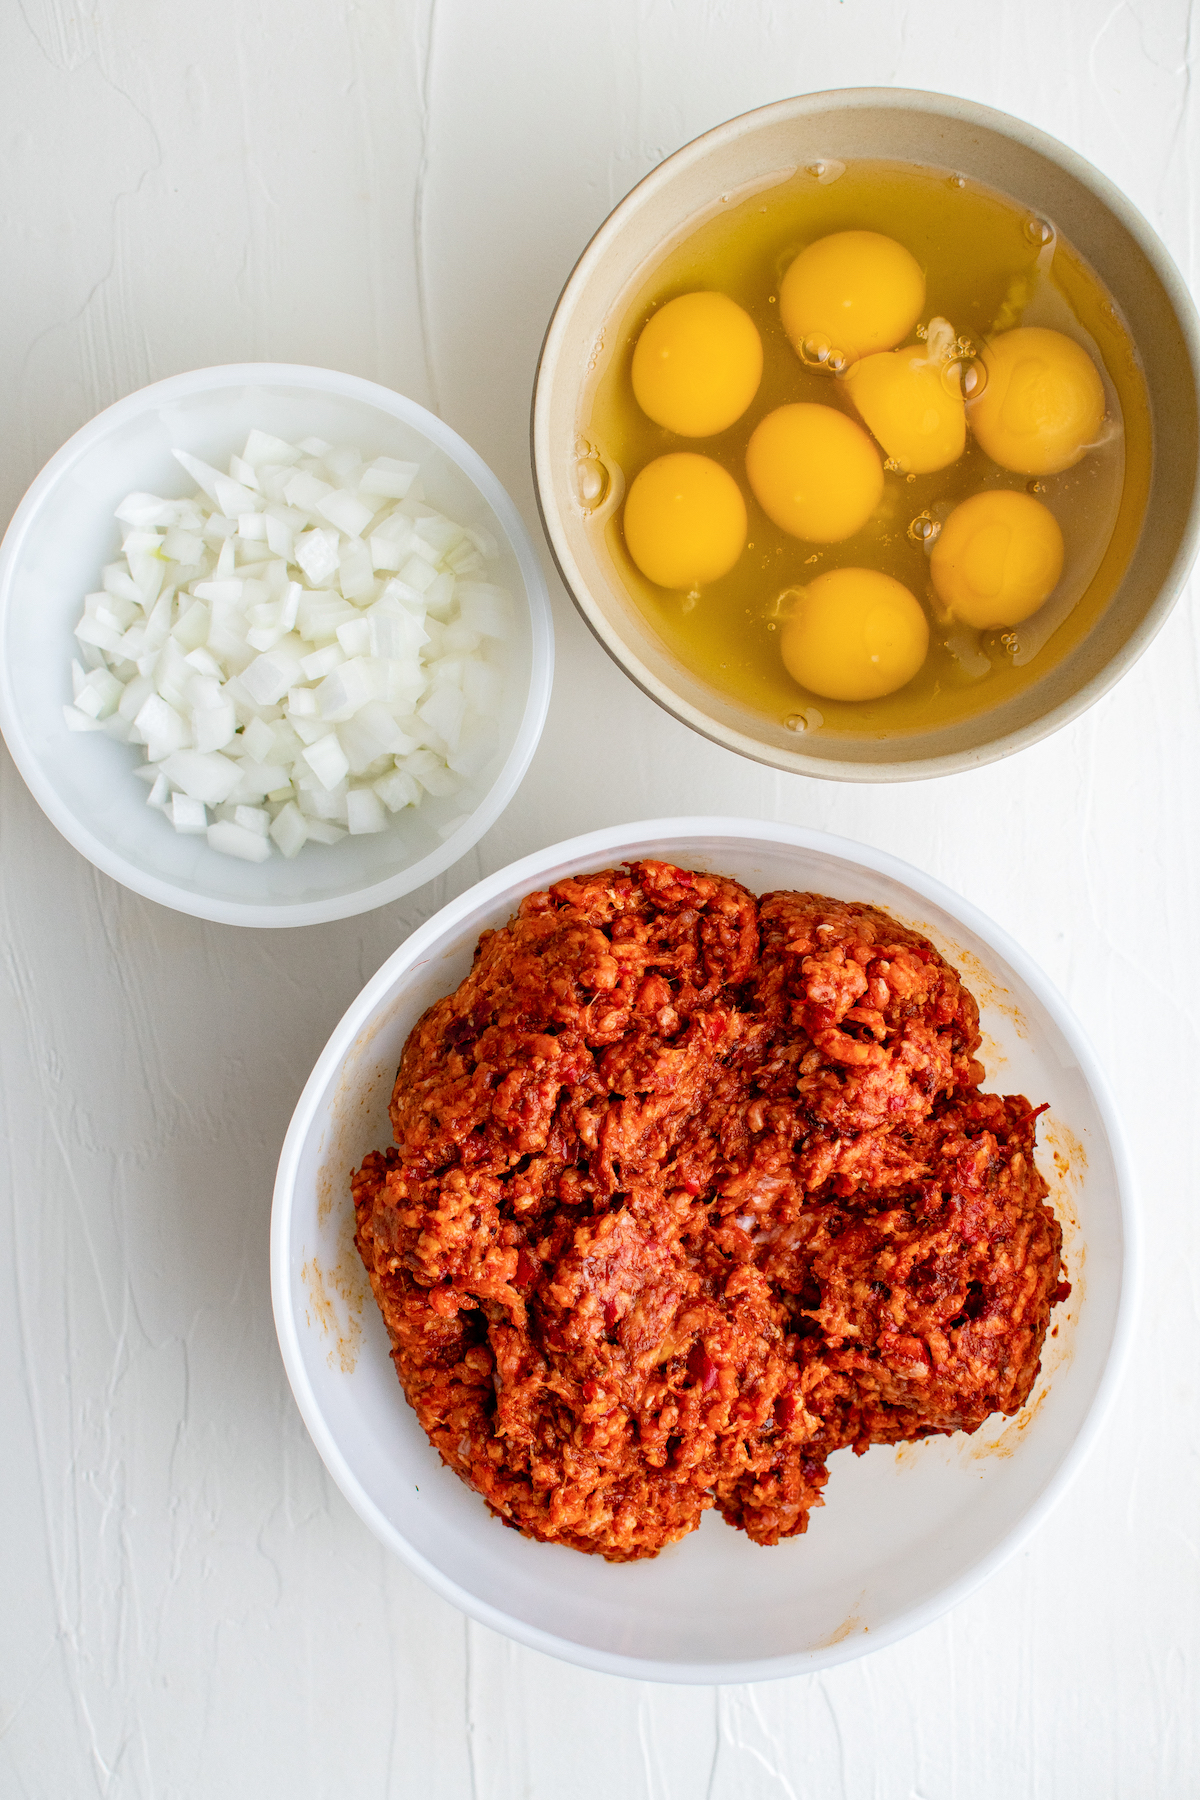 Ingredients for chorizo and eggs.